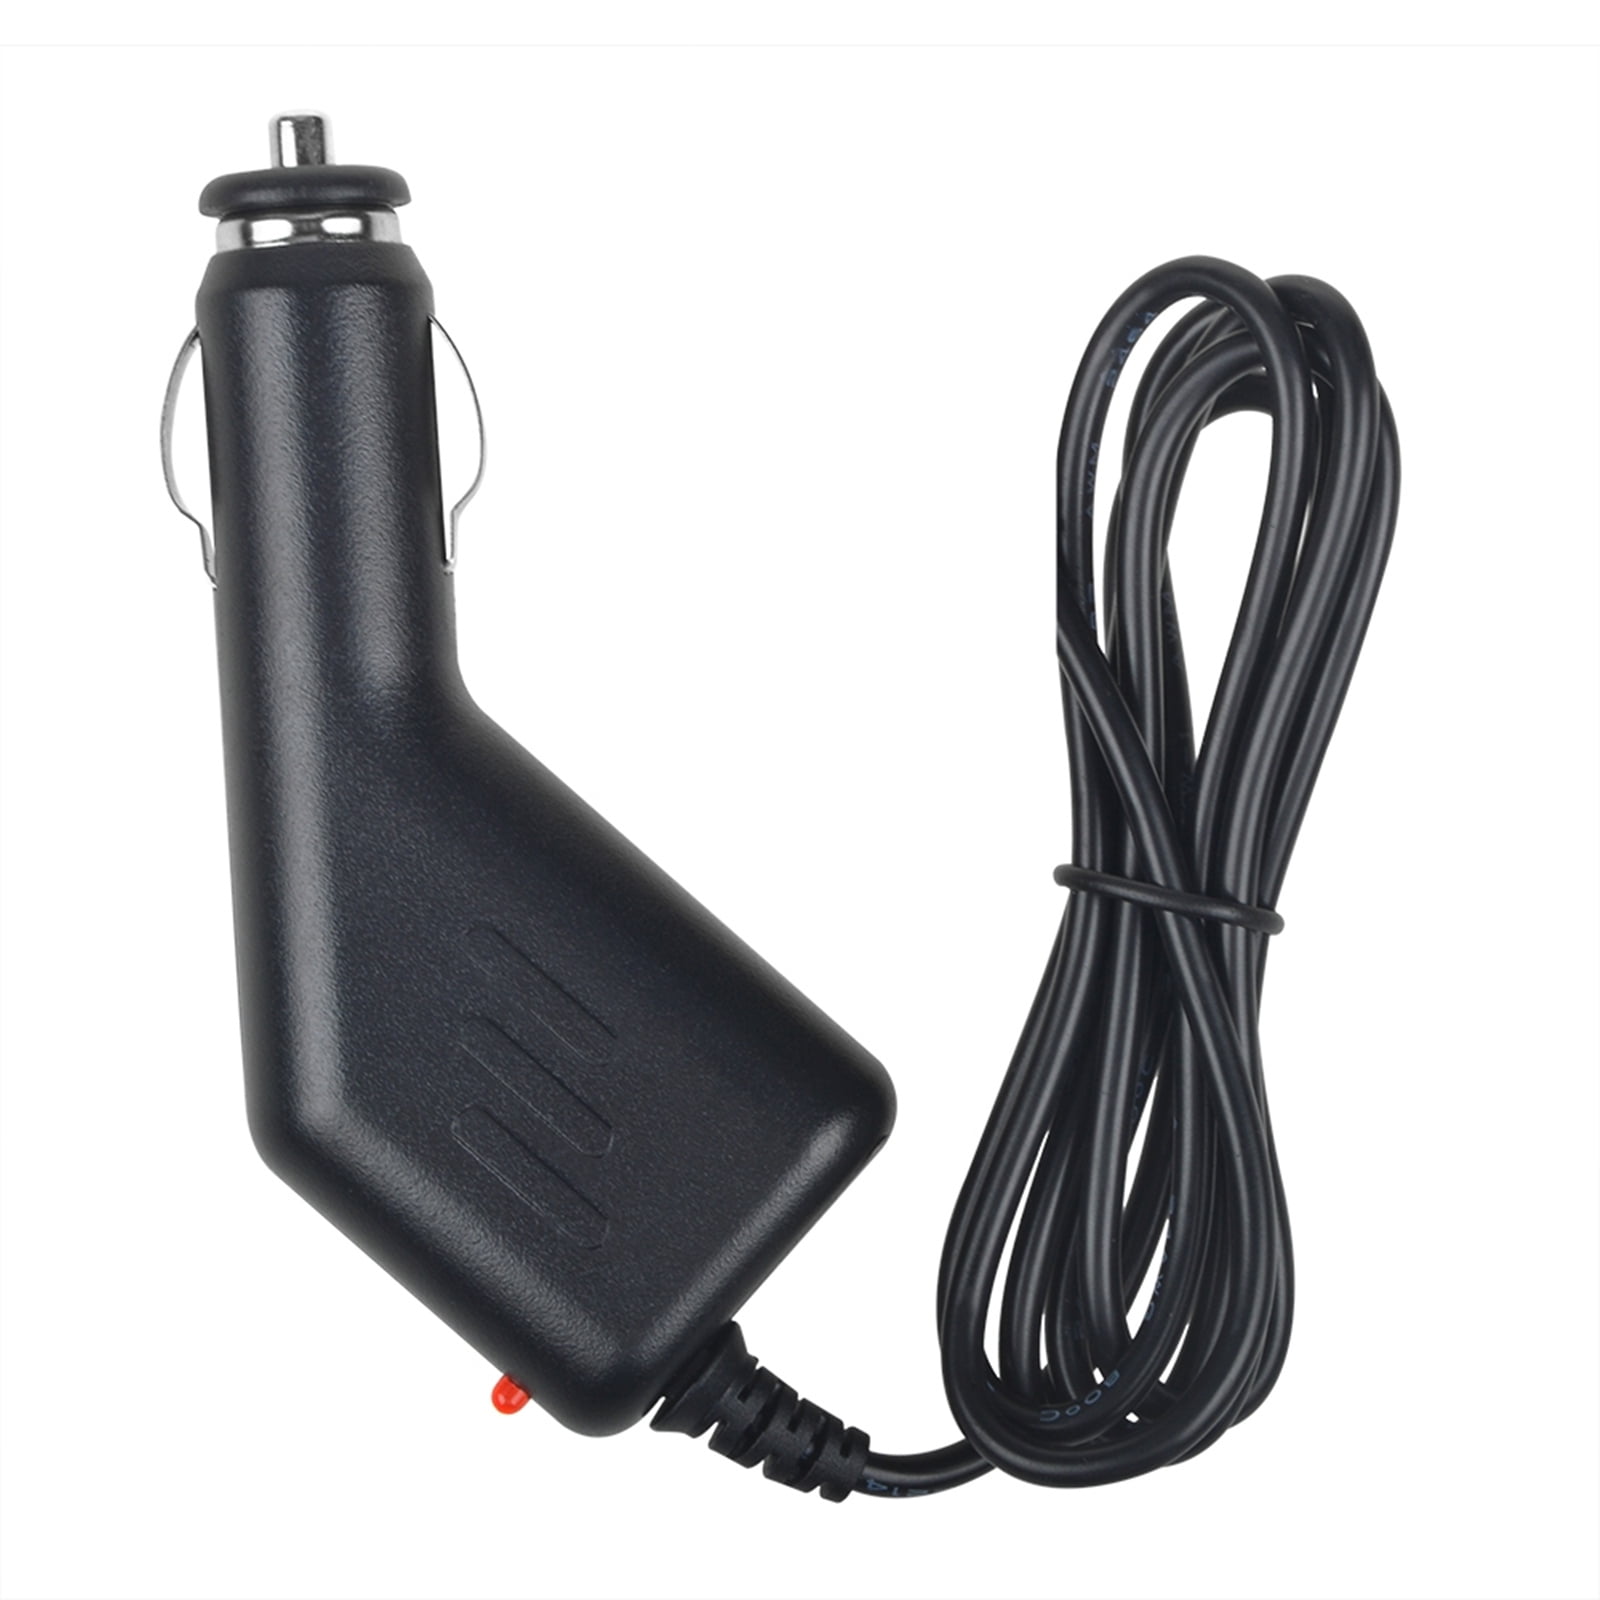 10' USB Car Charger Power Cord for Rand McNally Tnd530lm Tnd520 Tnd540 Truck GPS 